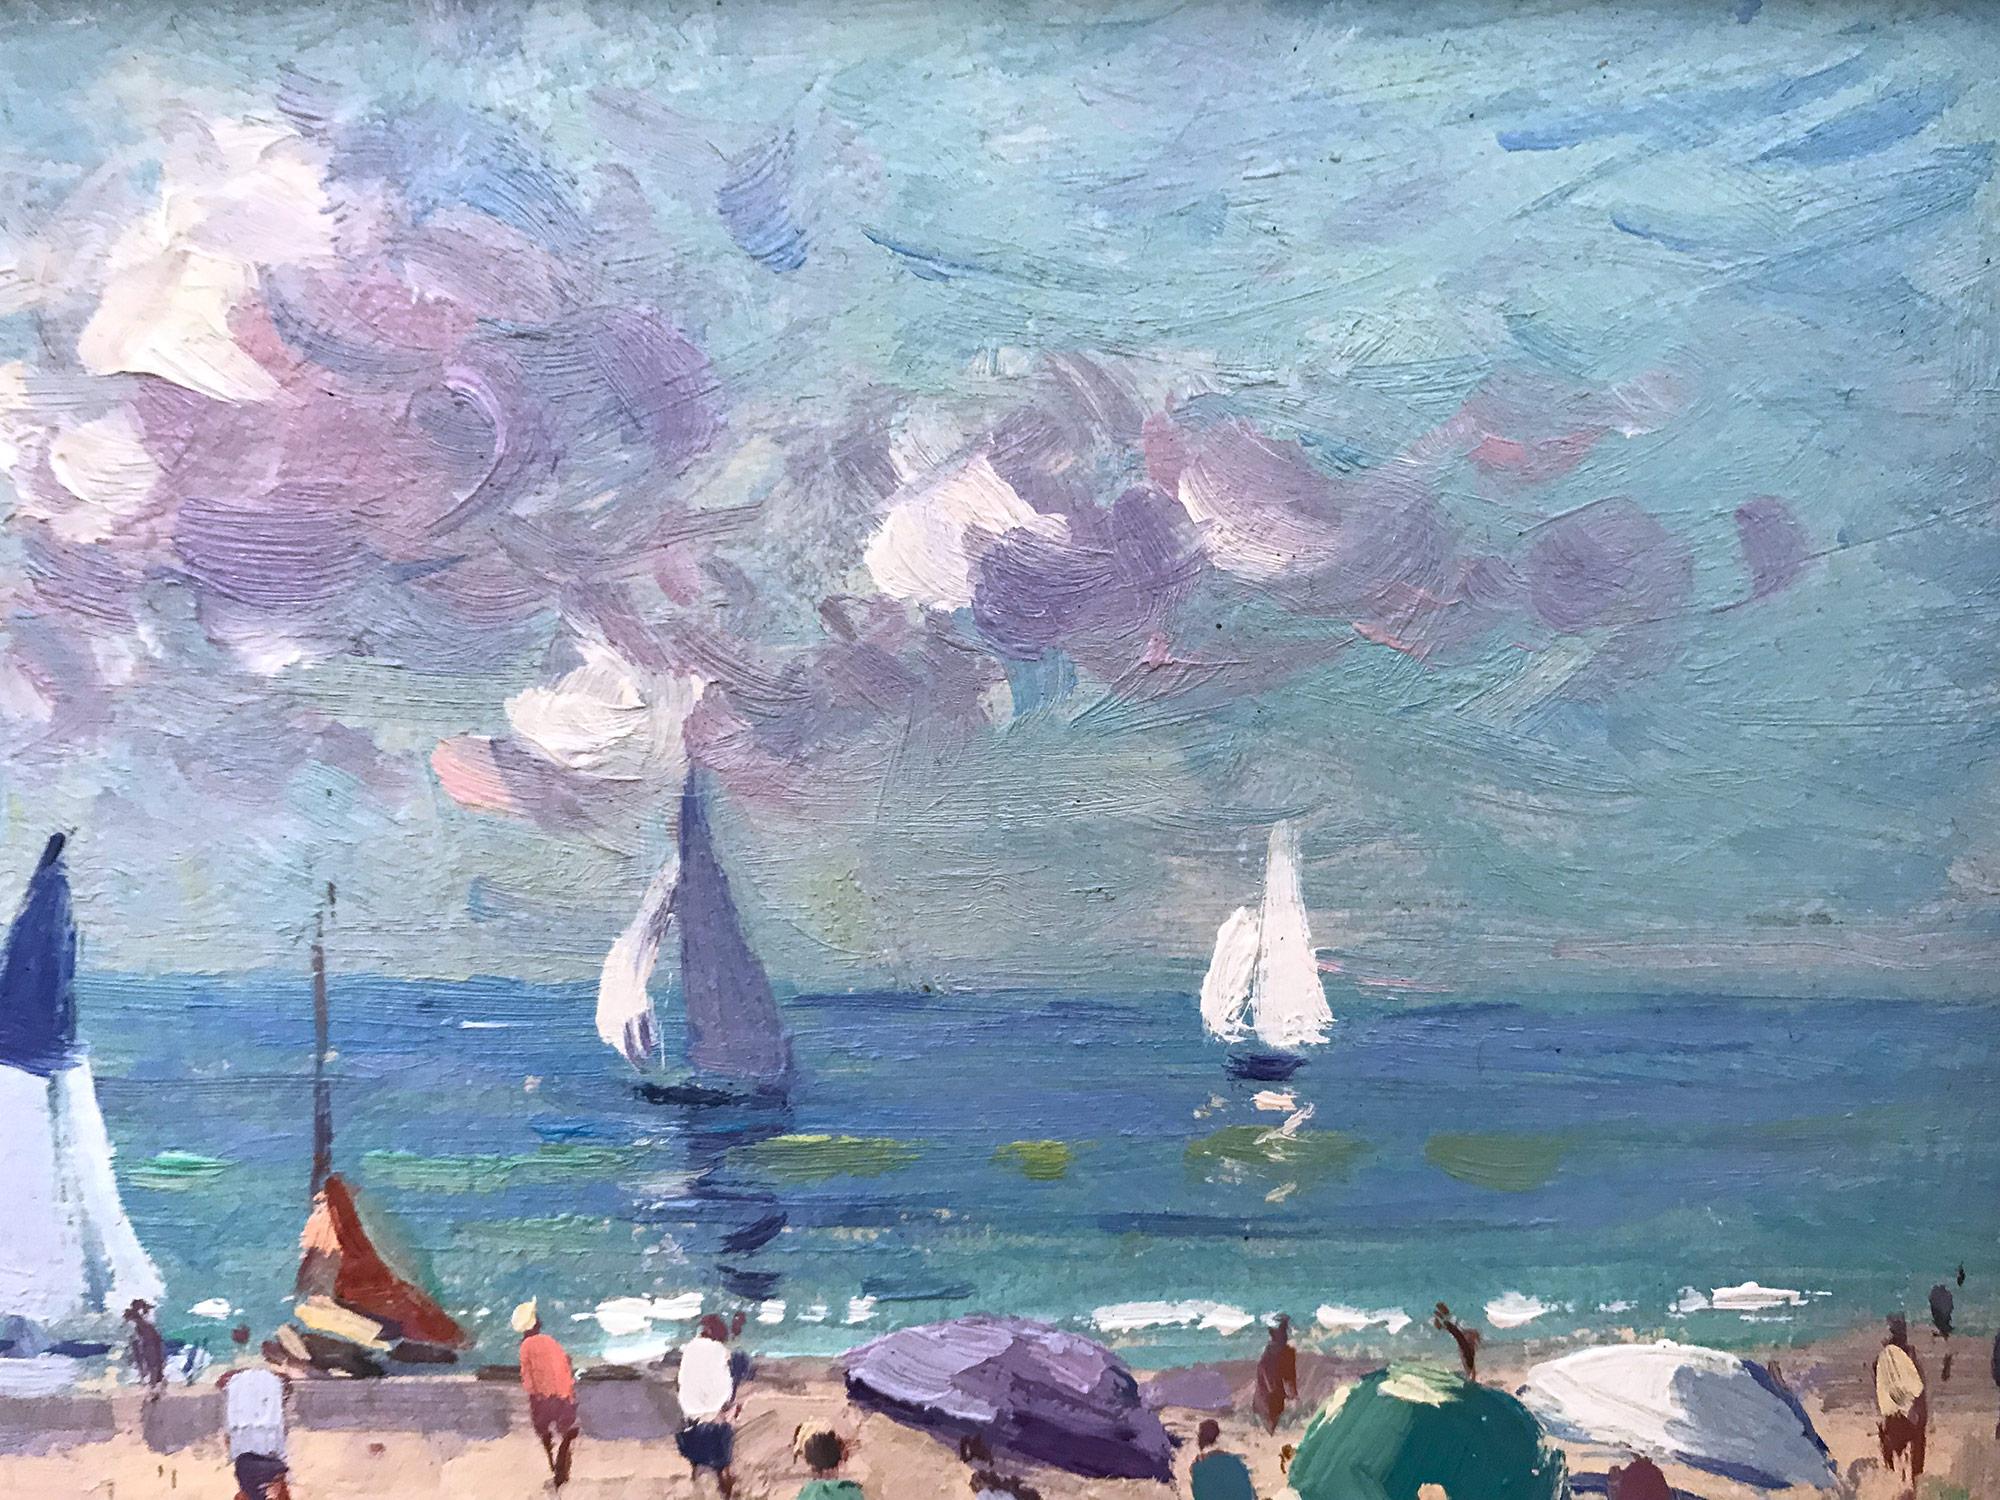 This captivating beach scene from the 20th Centruy is a wonderful display of Van der Plas's true passion for outdoor genre paintings. The vibrant colors and impressionistic brushwork is done with both whimsey and boldness. This painting depicts a